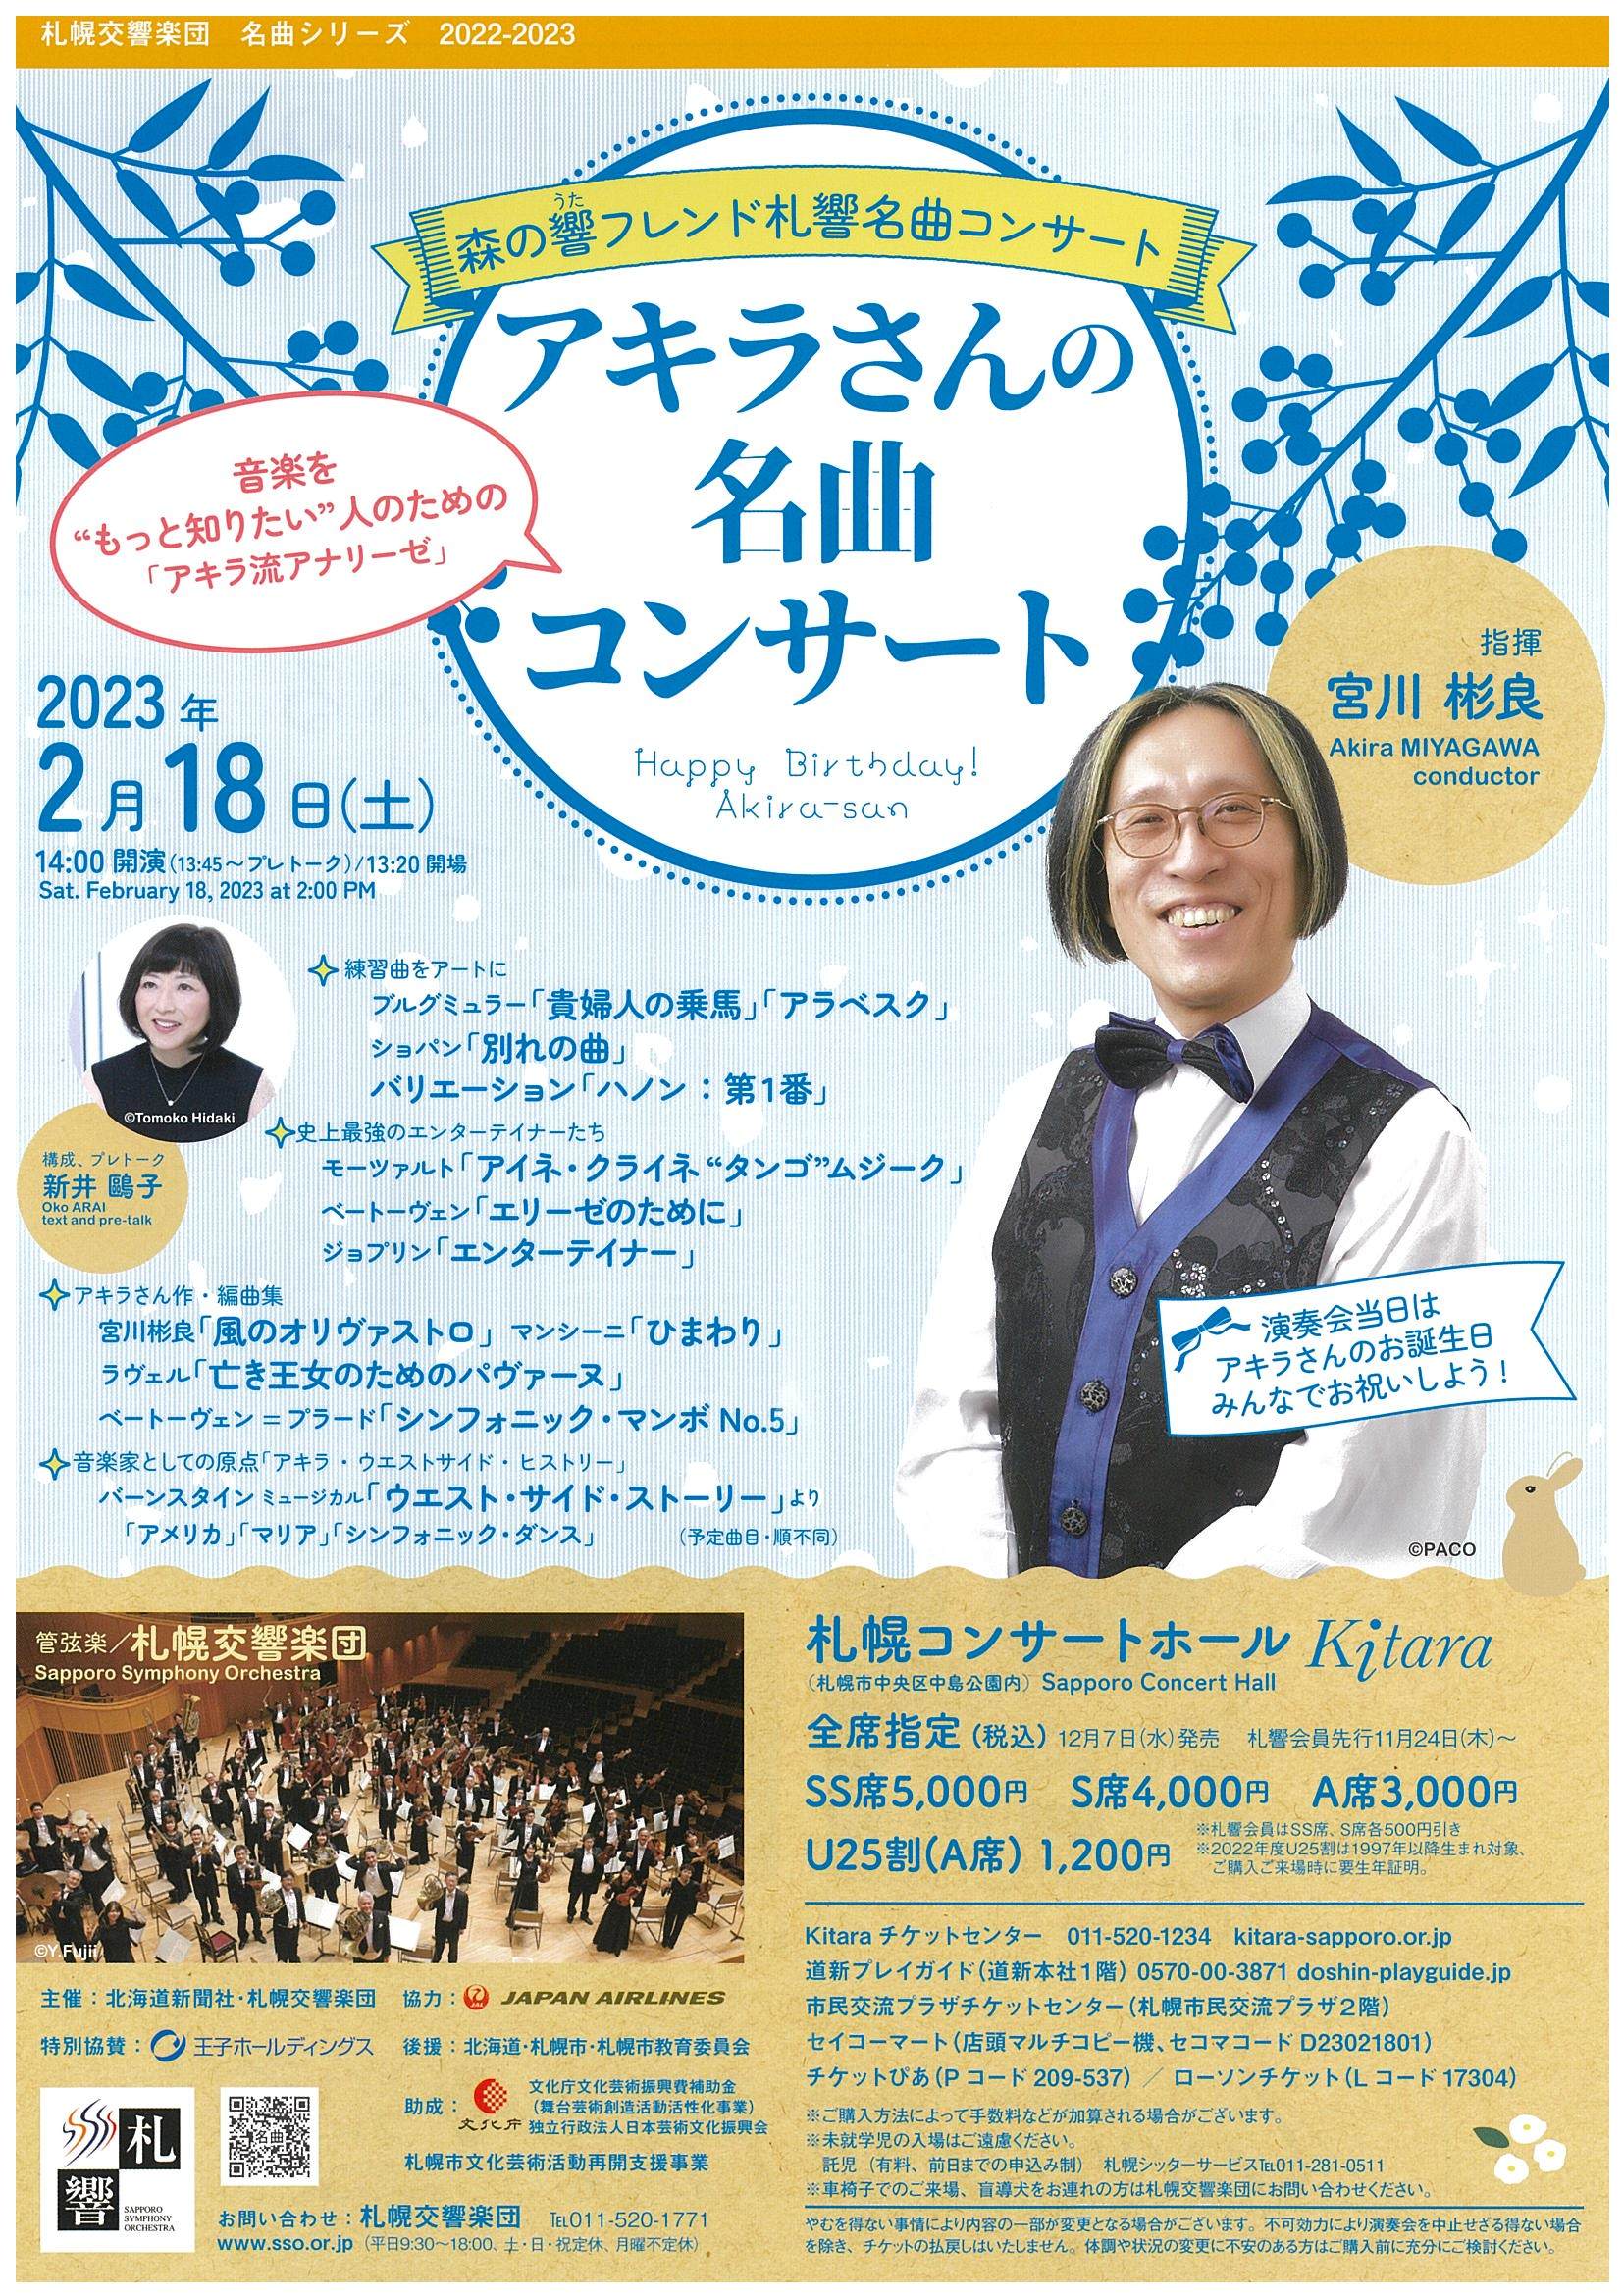 【Tickets Sold Out Feb. 18】 Sakkyo 『AKIRA-san’s Masterpiece Concert』 Availability of tickets on the day of the concert